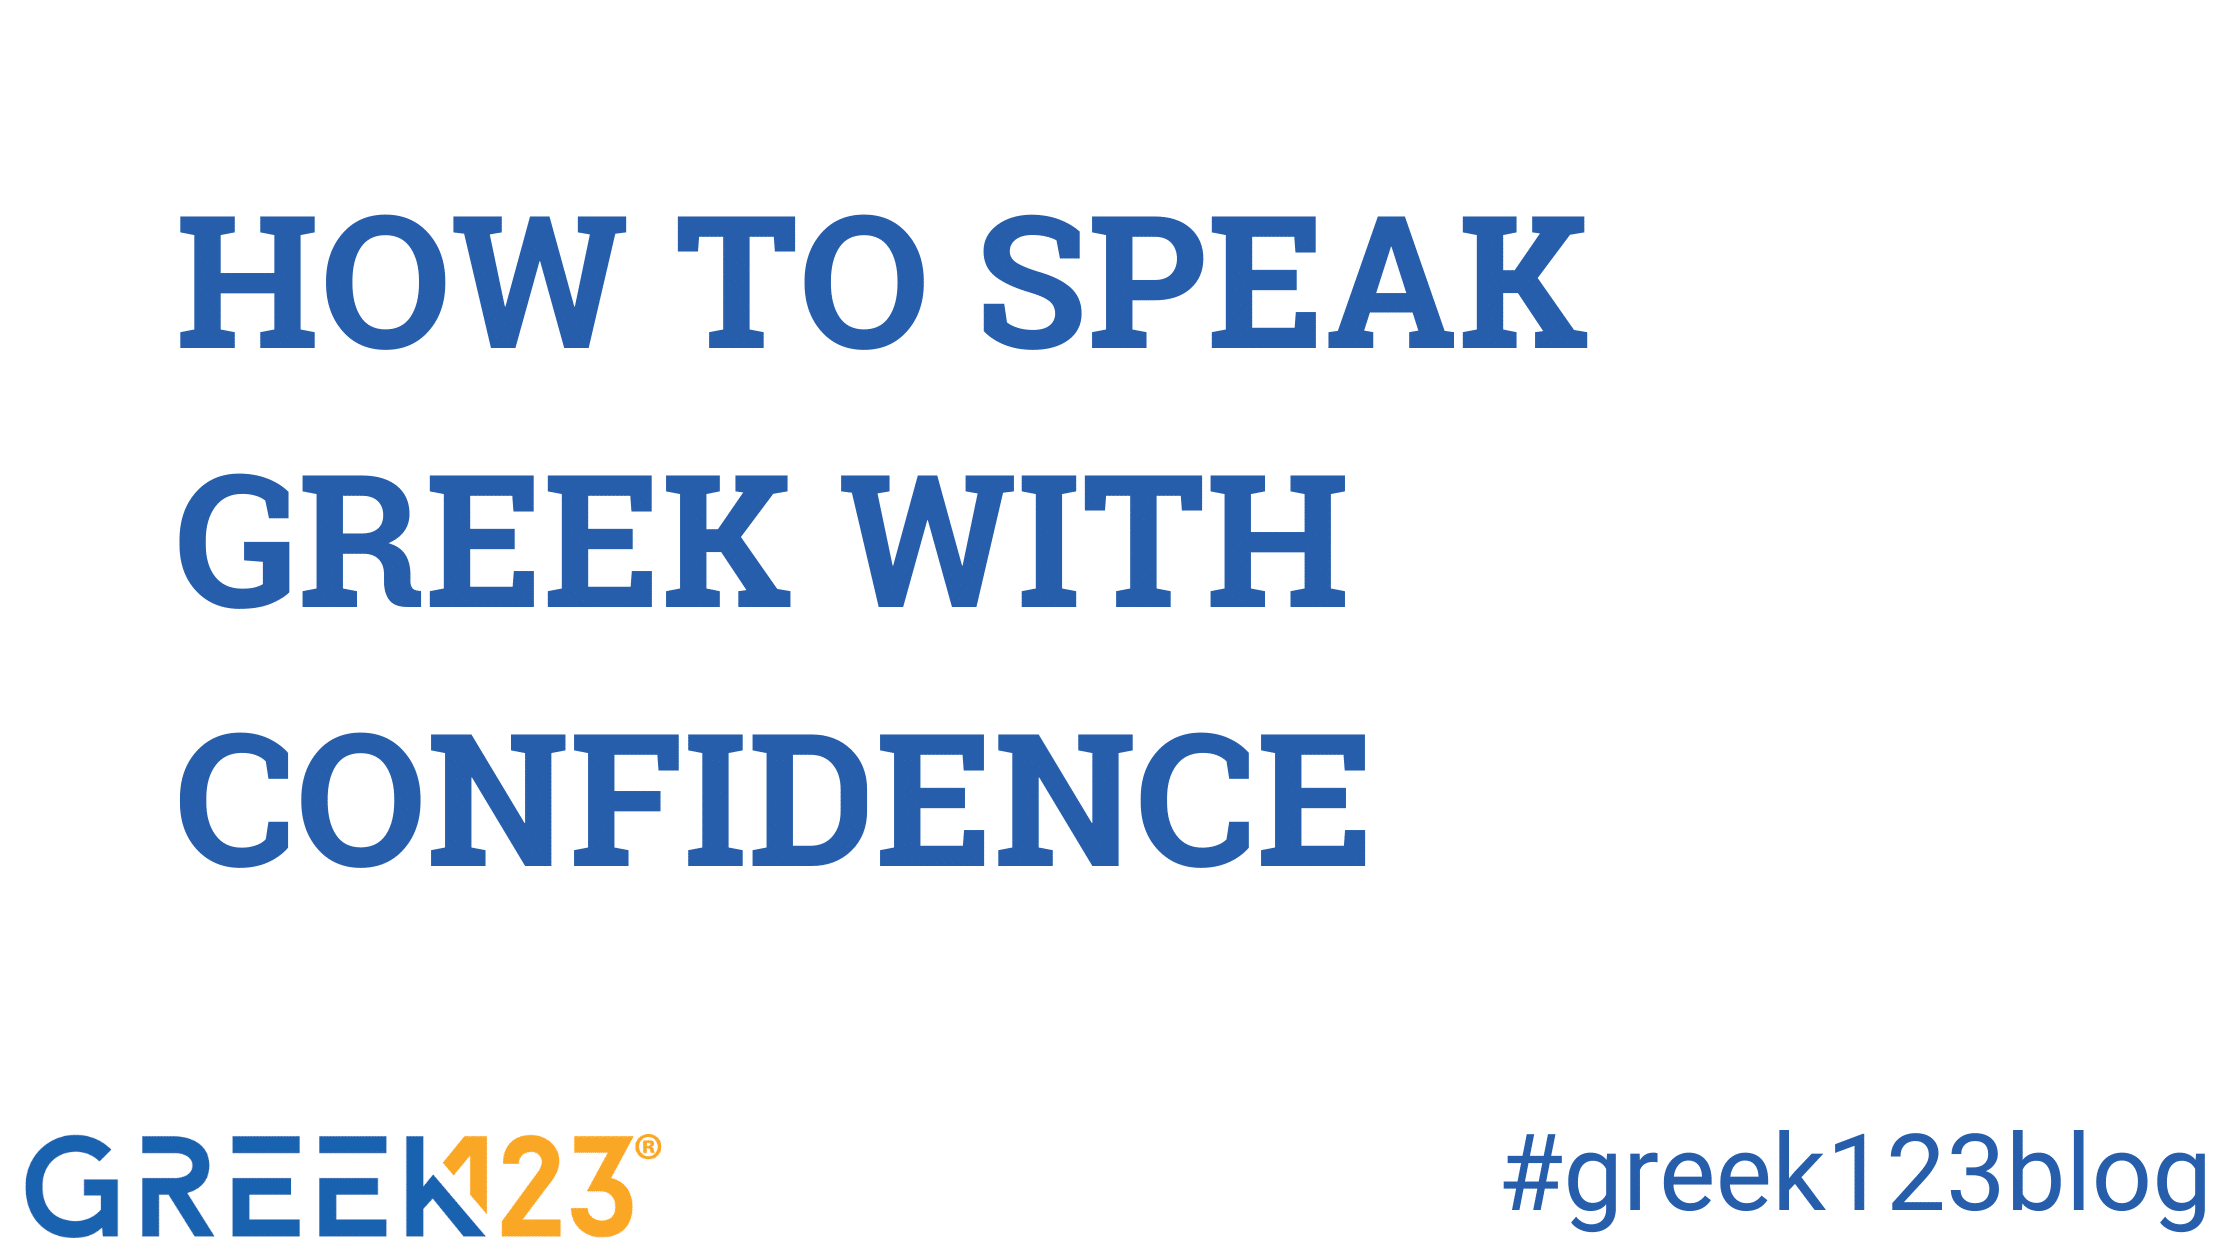 How to Speak Greek with Confidence - The Ultimate Guide!